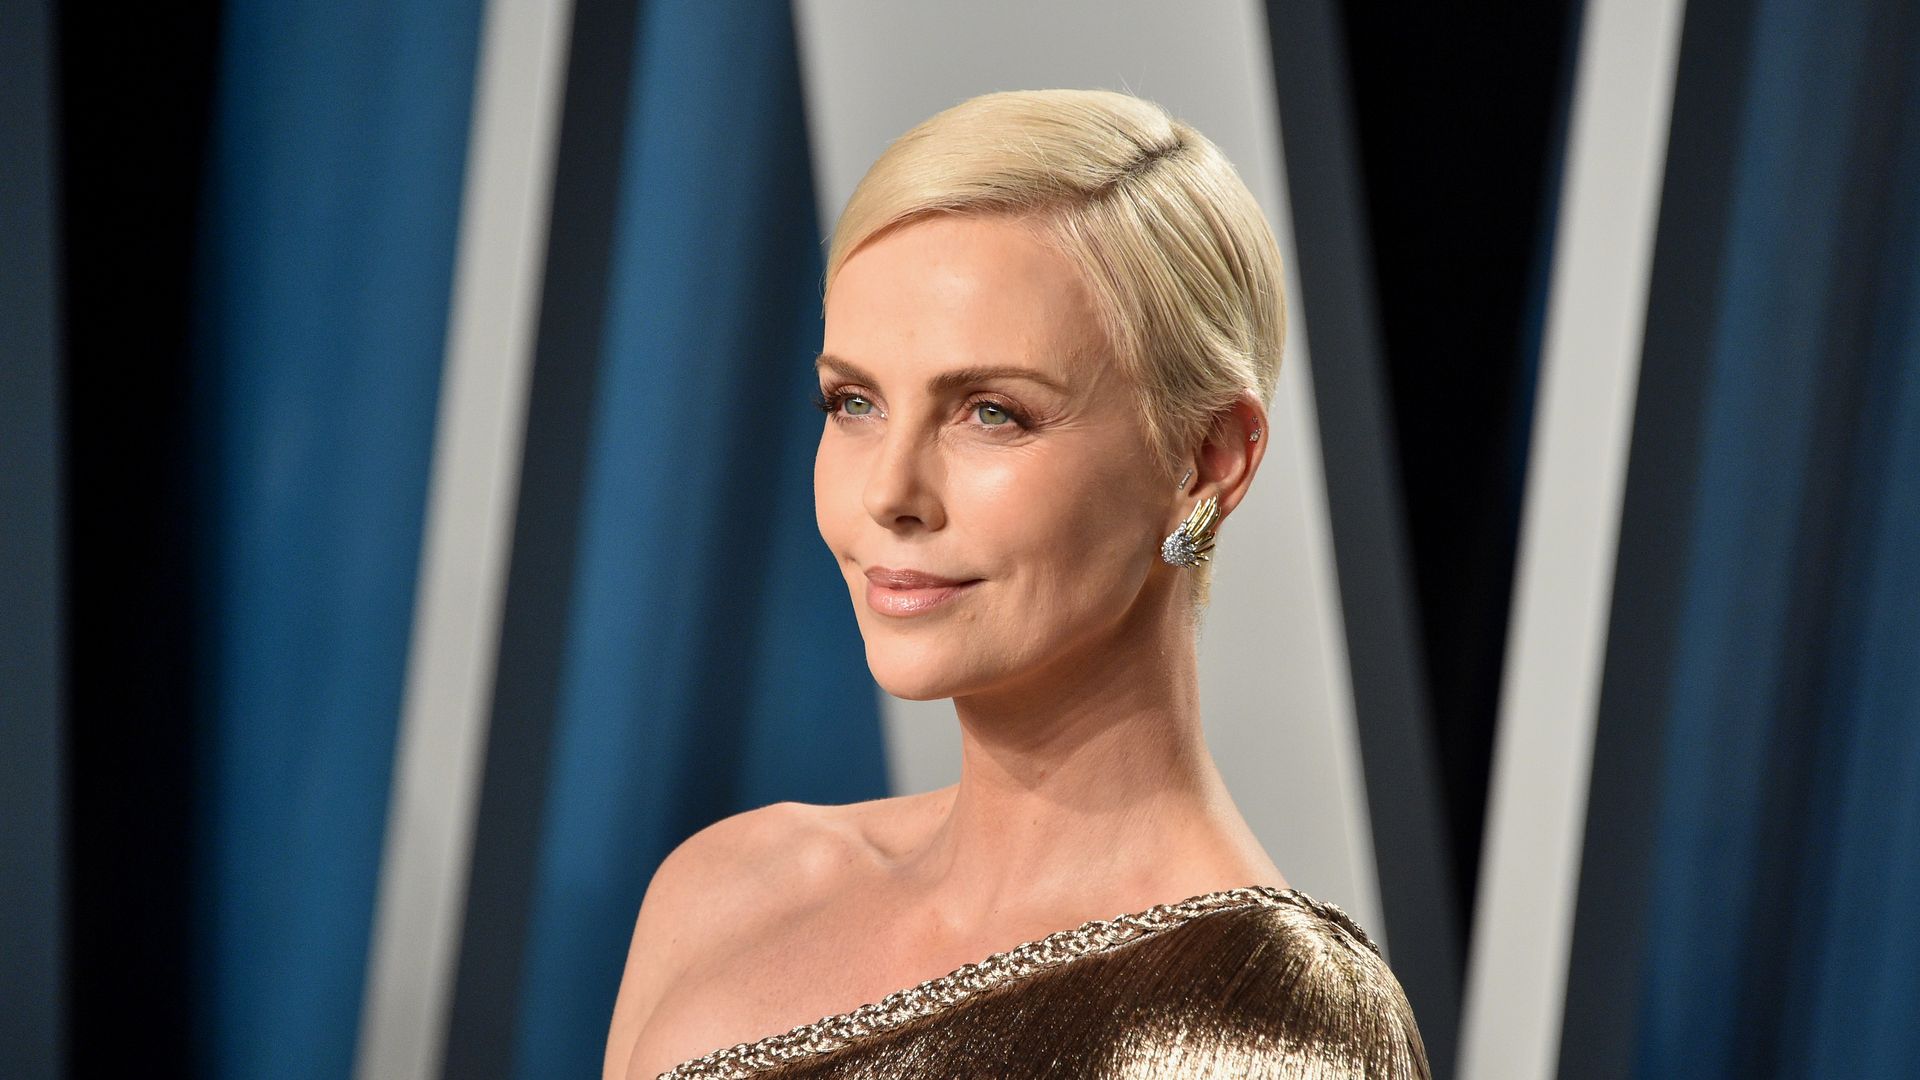 Charlize Theron attends the 2020 Vanity Fair Oscar Party hosted by Radhika Jones at Wallis Annenberg Center for the Performing Arts on February 09, 2020 in Beverly Hills, California